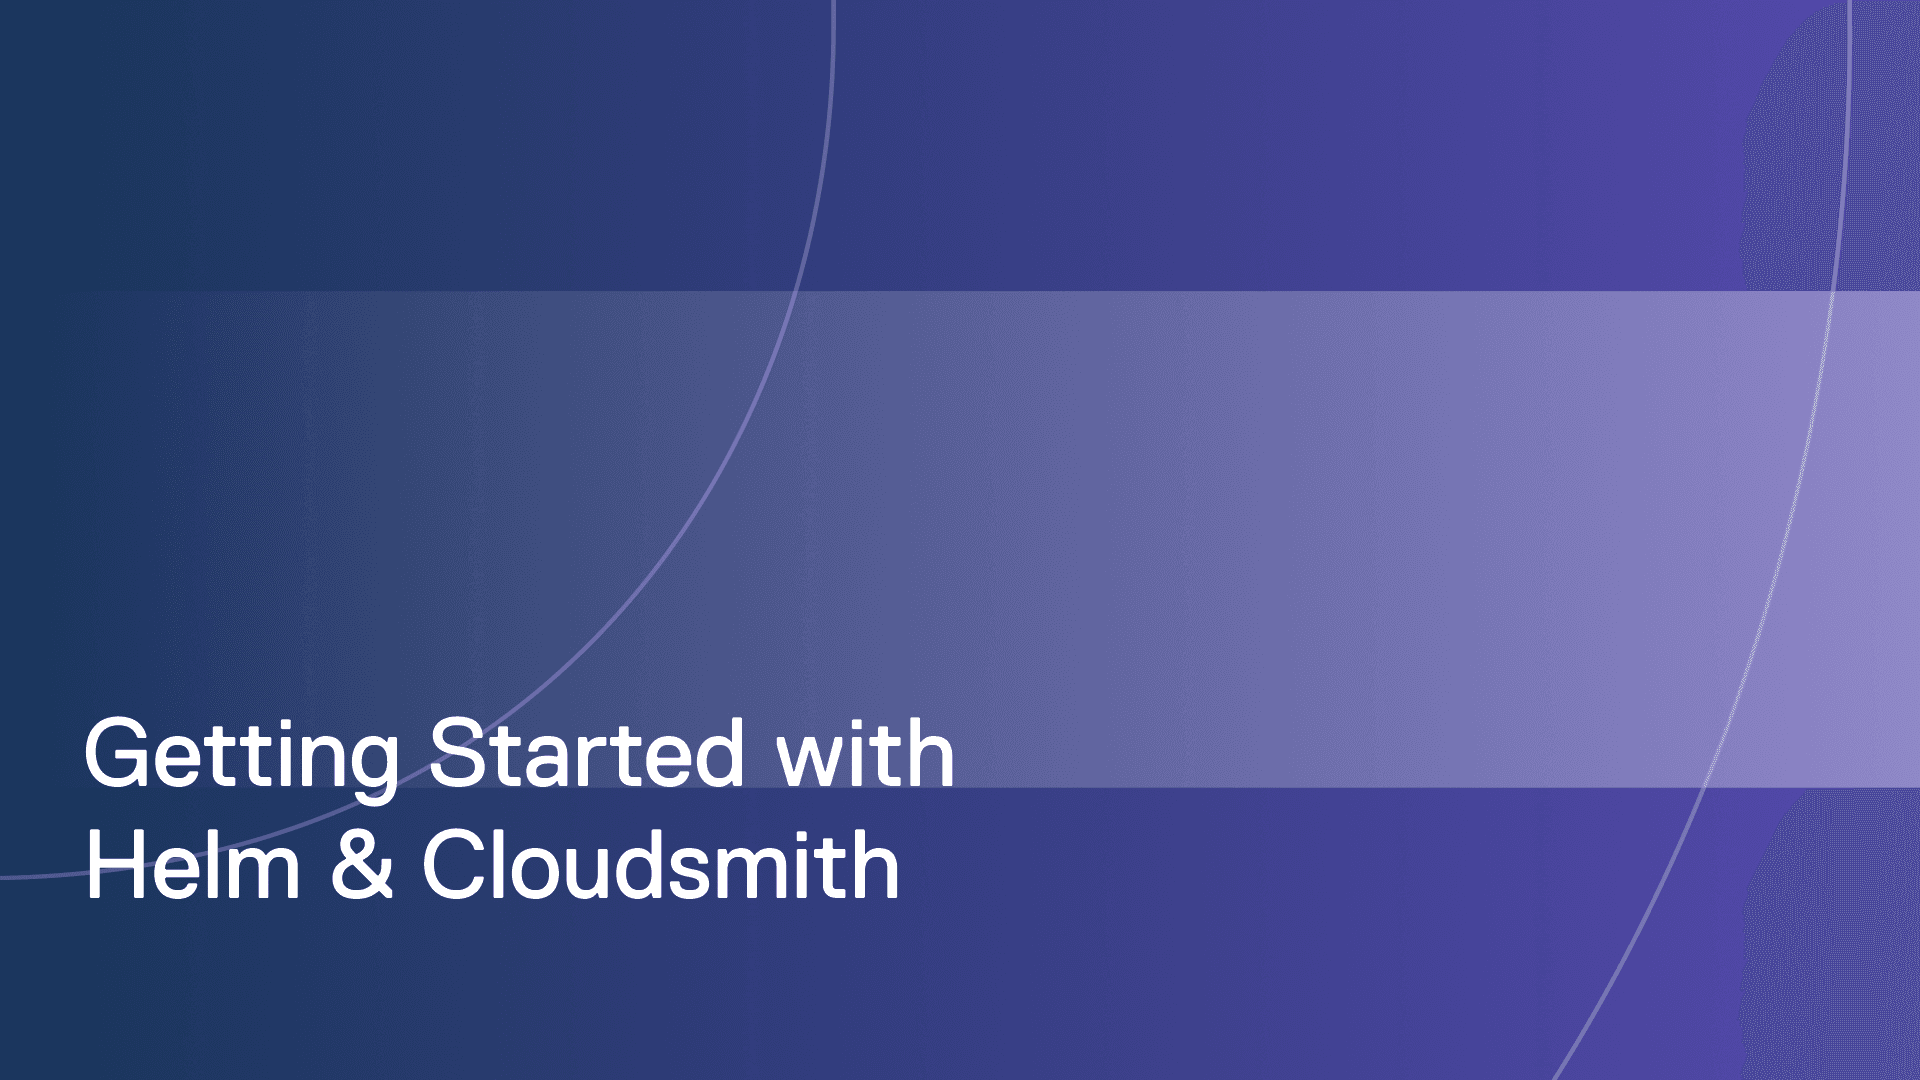 Getting started with Helm and Cloudsmith